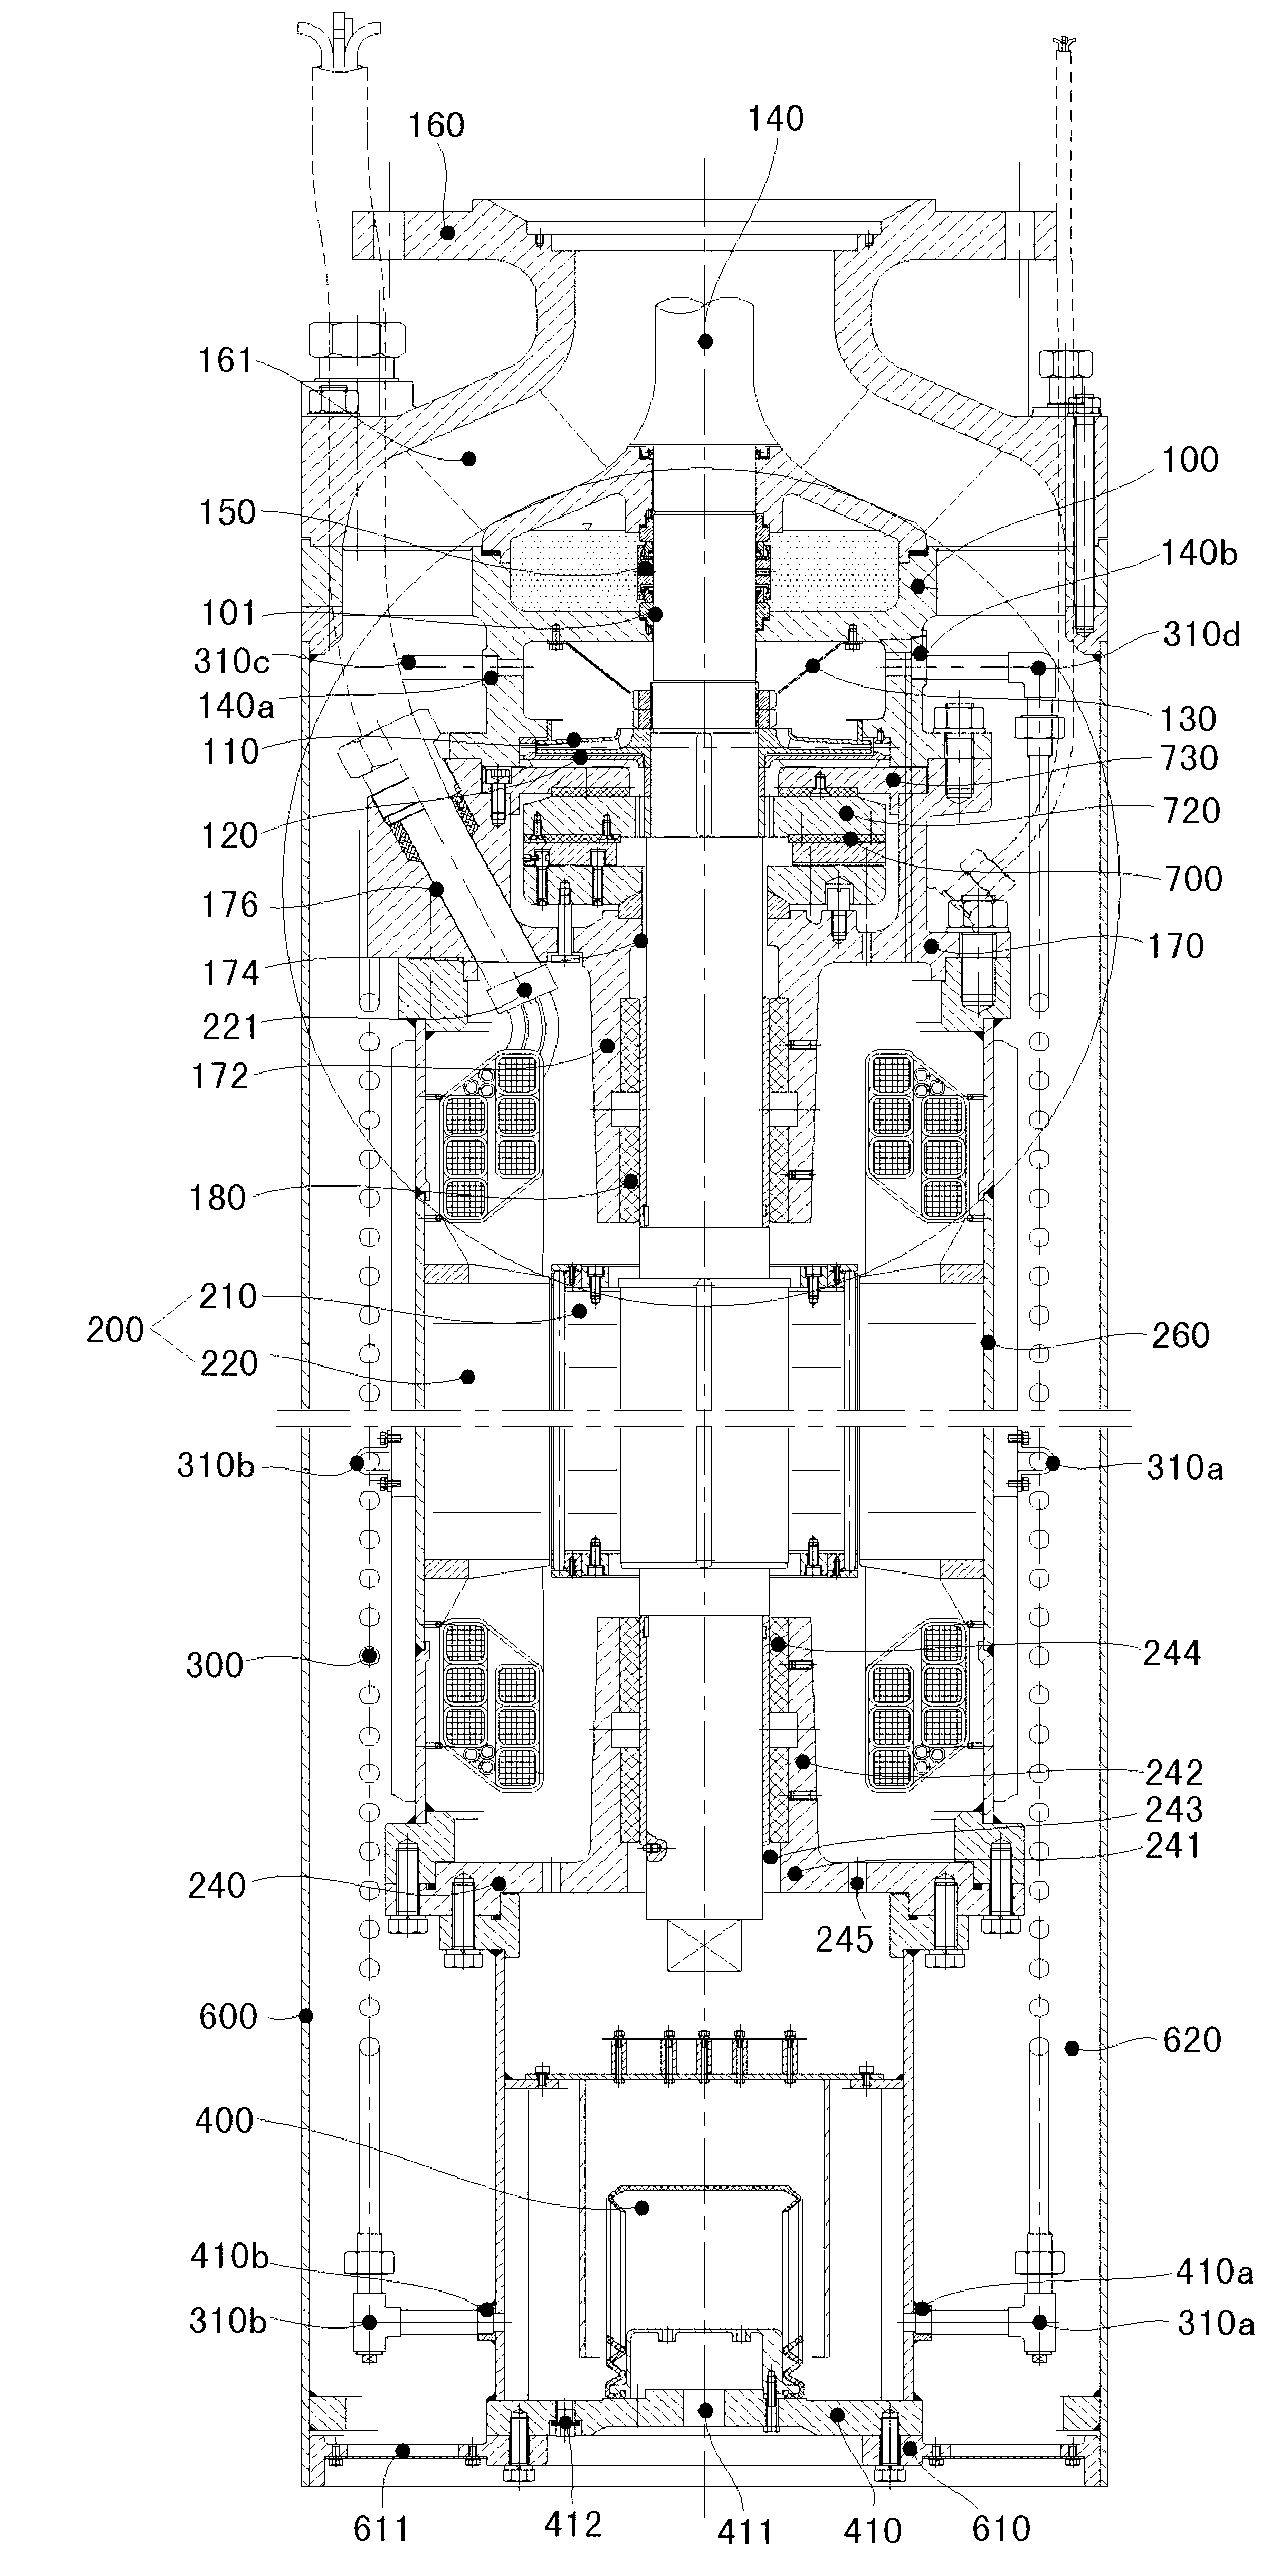 Motor cooling structure of immersed pump